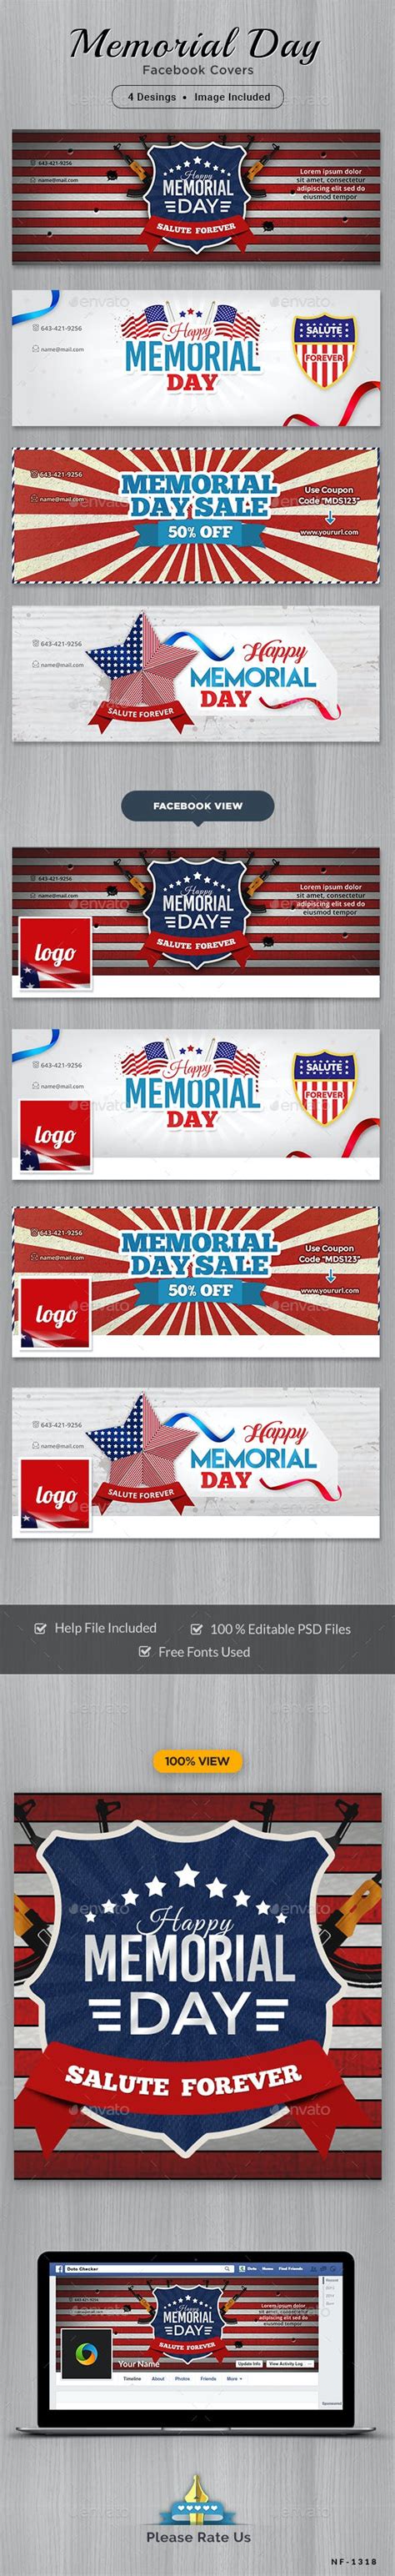 Memorial Day Facebook Covers 4 Designs Images Included By Hyov